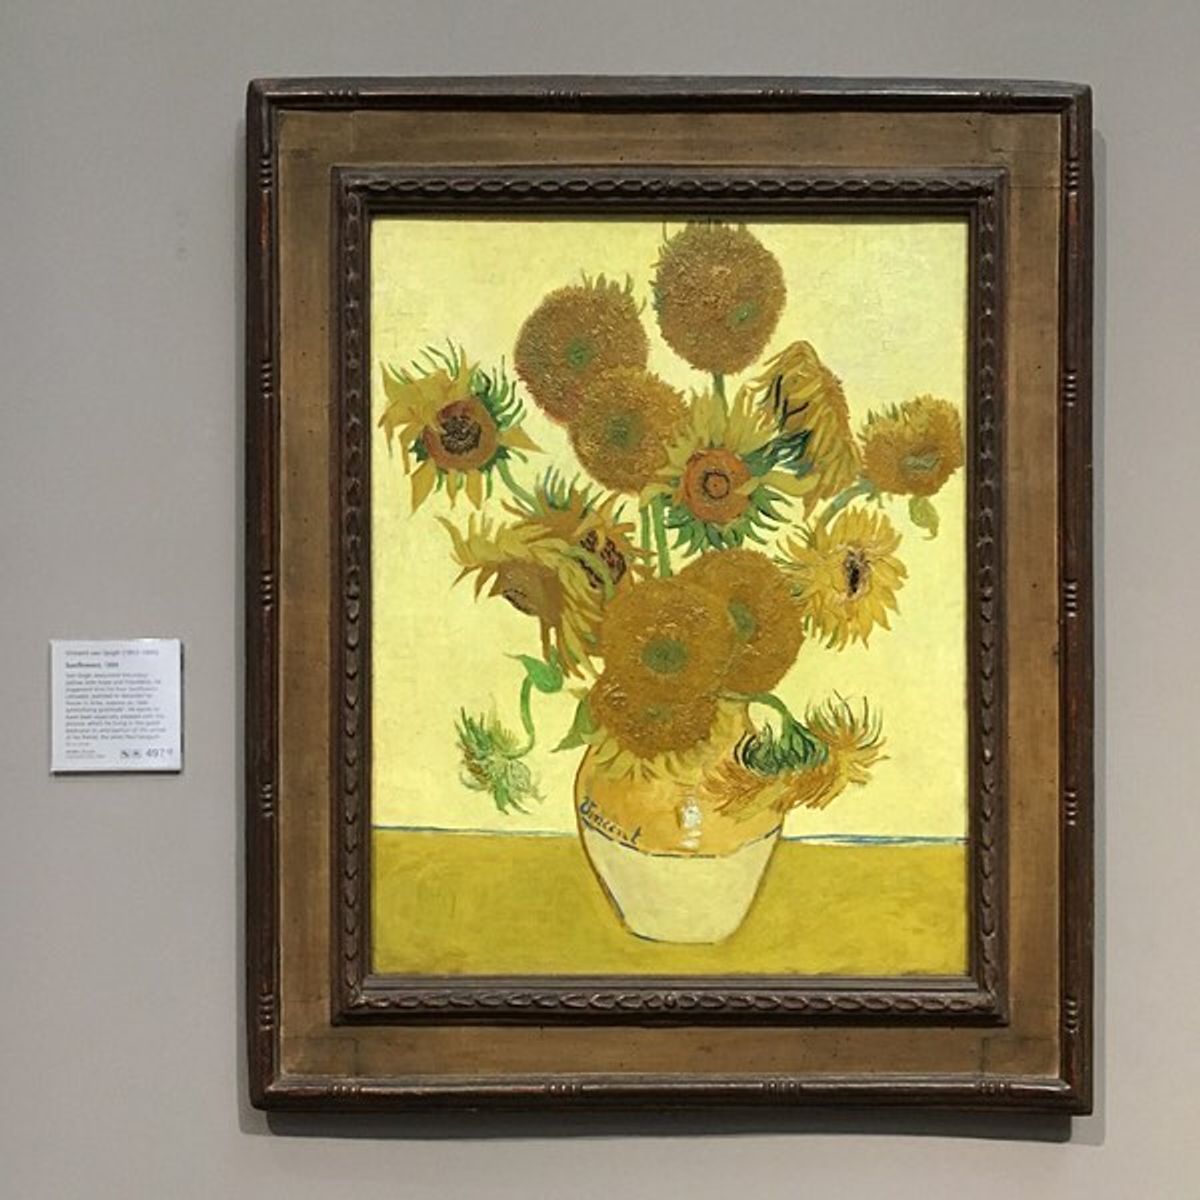 Van Gogh, Sunflowers, August 1888, at the National Gallery, London Courtesy of the National Gallery via Instagram